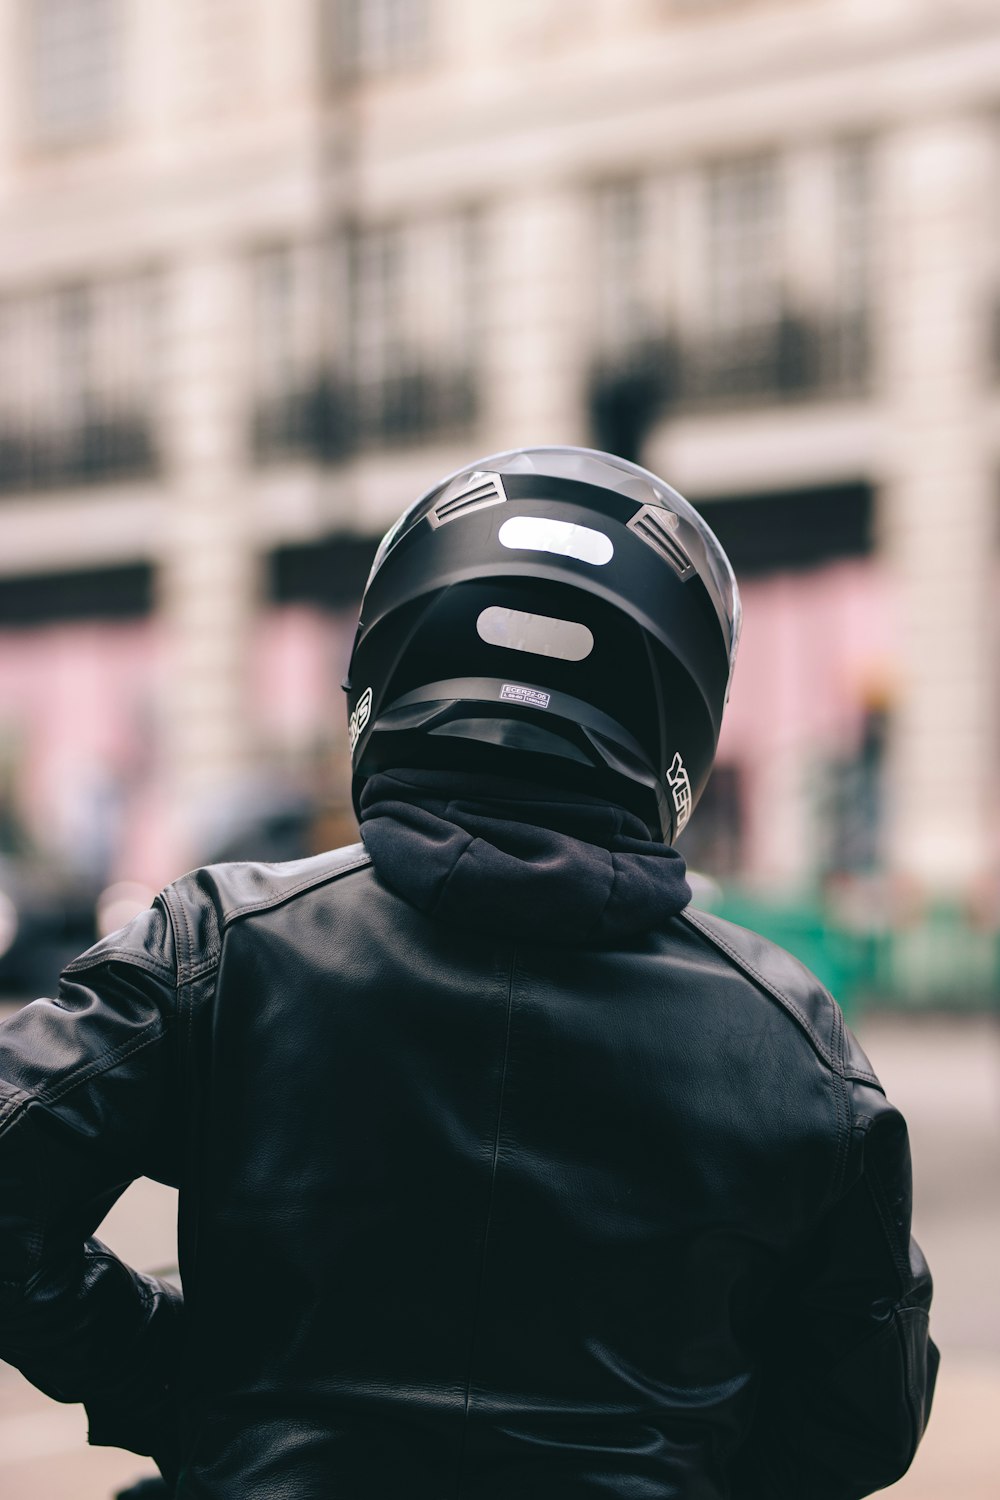 person in black leather jacket wearing black and white helmet